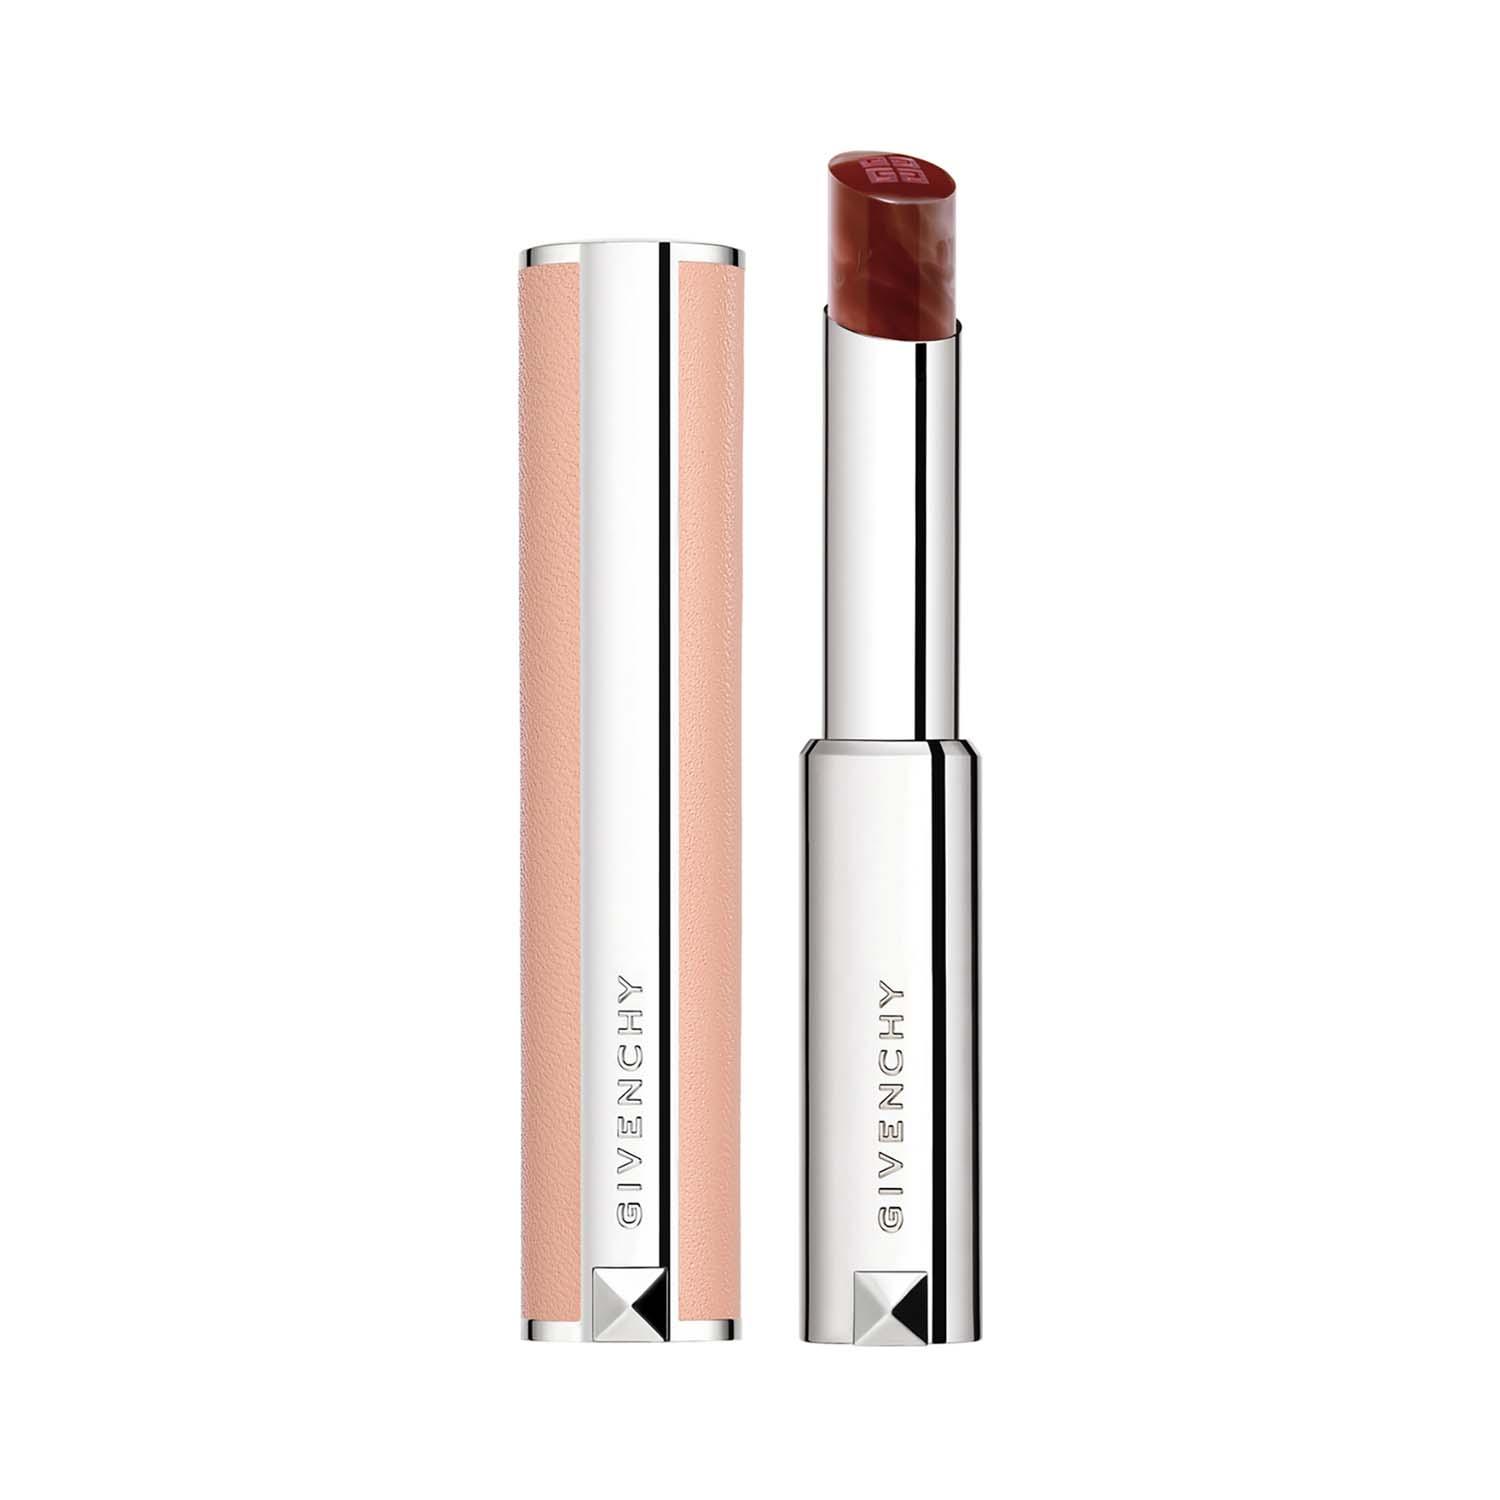 Givenchy | Givenchy Rose Perfecto - N501 Spicy Brown (2.8 g)